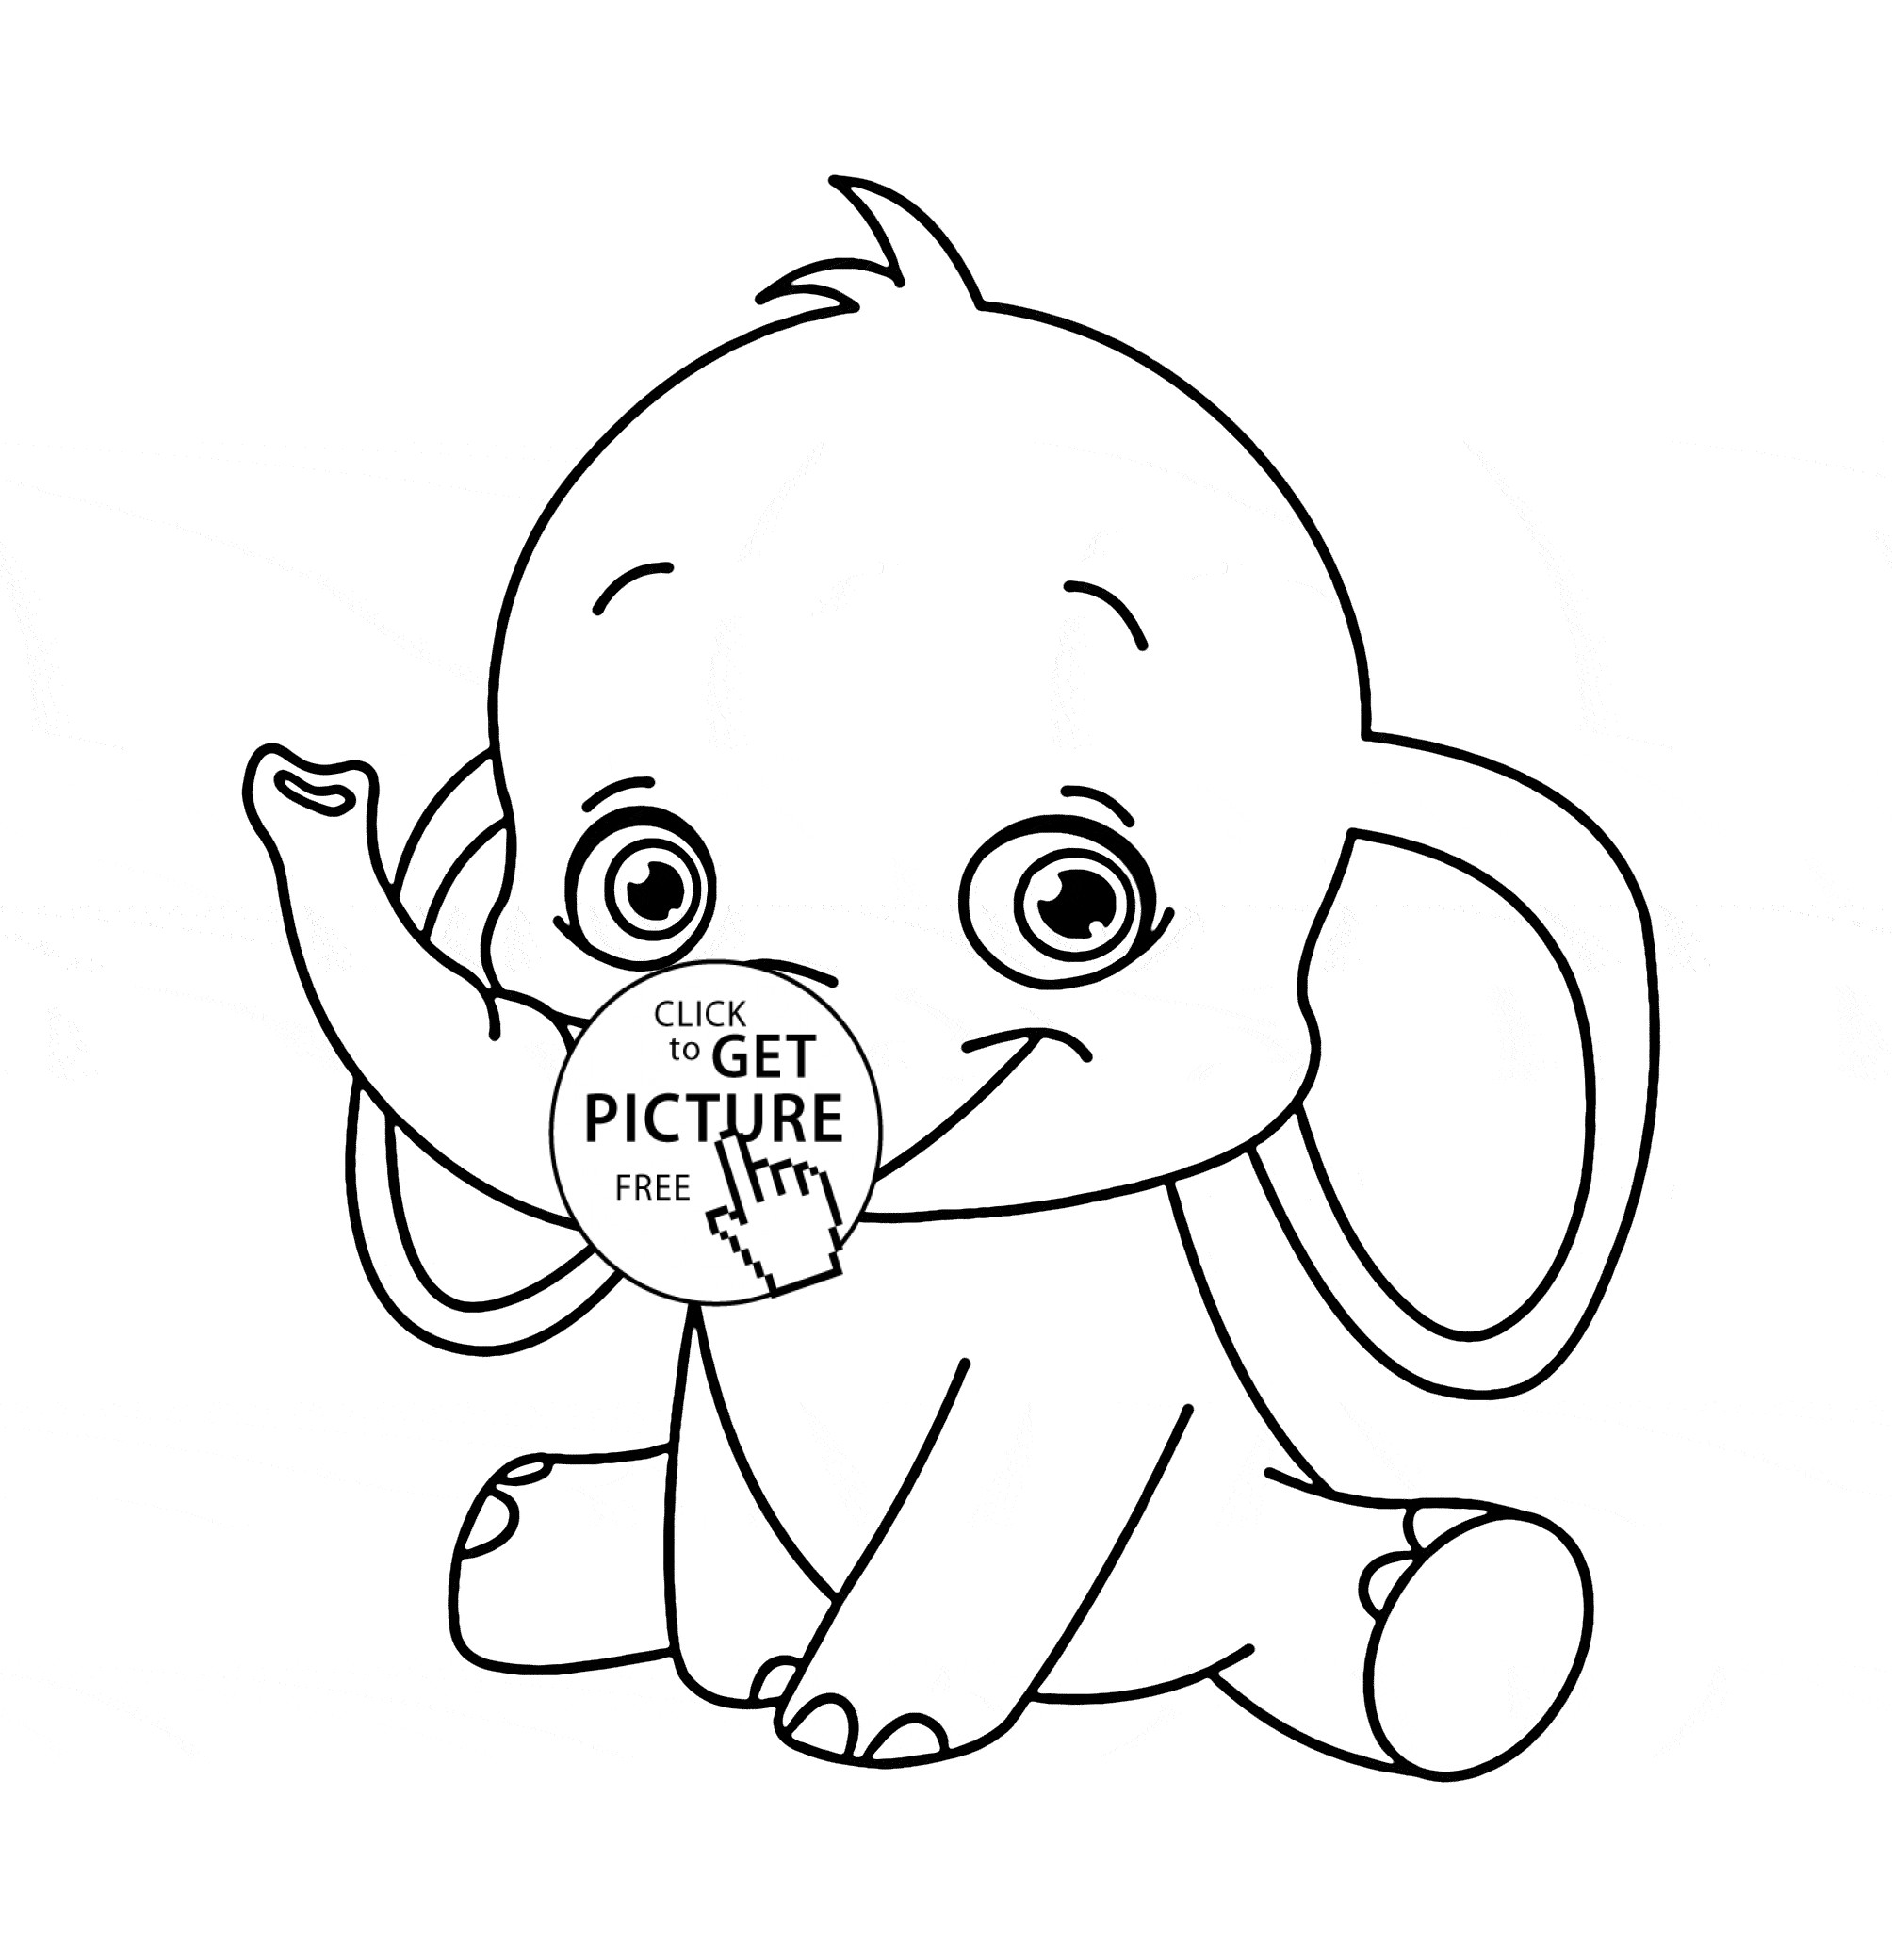 Cute Baby Animal Coloring Pages
 Cute Baby Animal Coloring Pages Printable Food Ideas